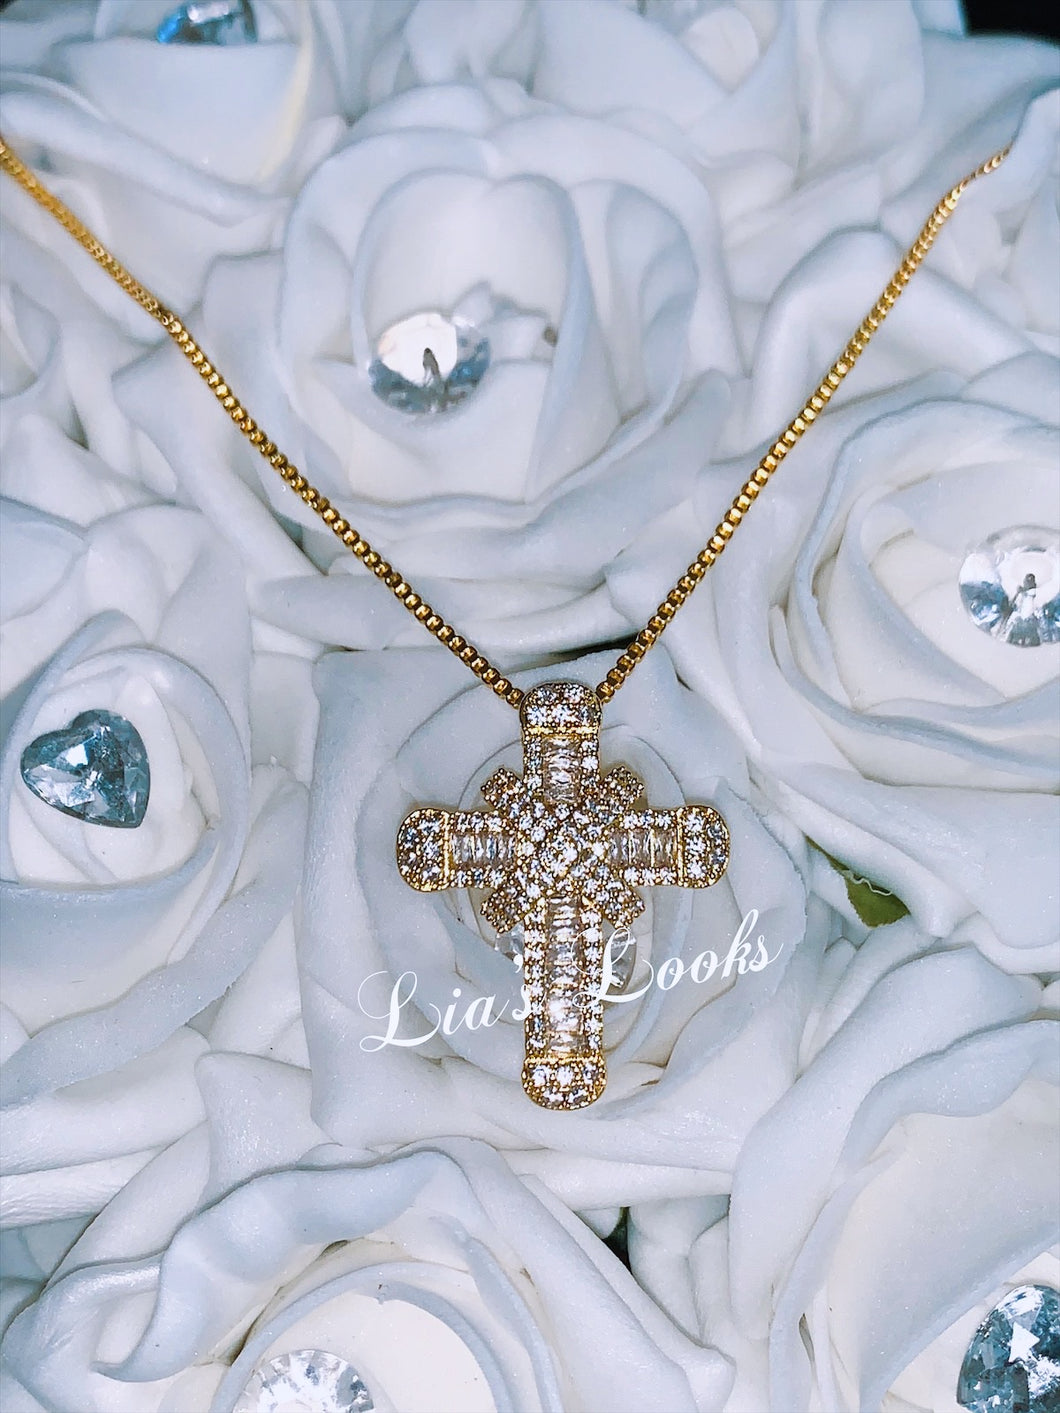 Chunky Gold Bling Small Cross Necklace (Box Chain)